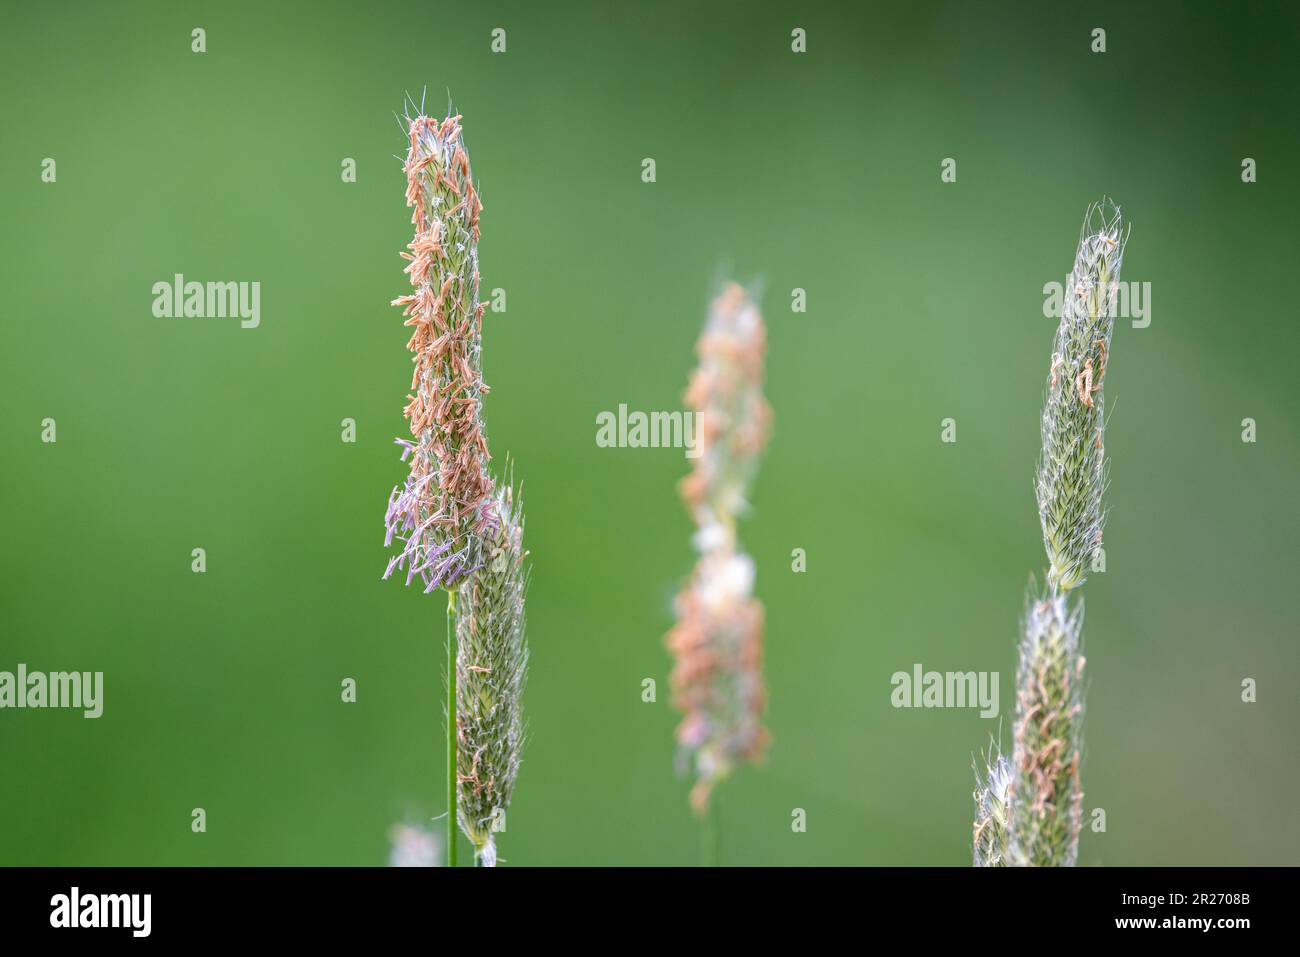 Close up of a fruiting sedge plant on edge of pond against diffused green background. Stock Photo